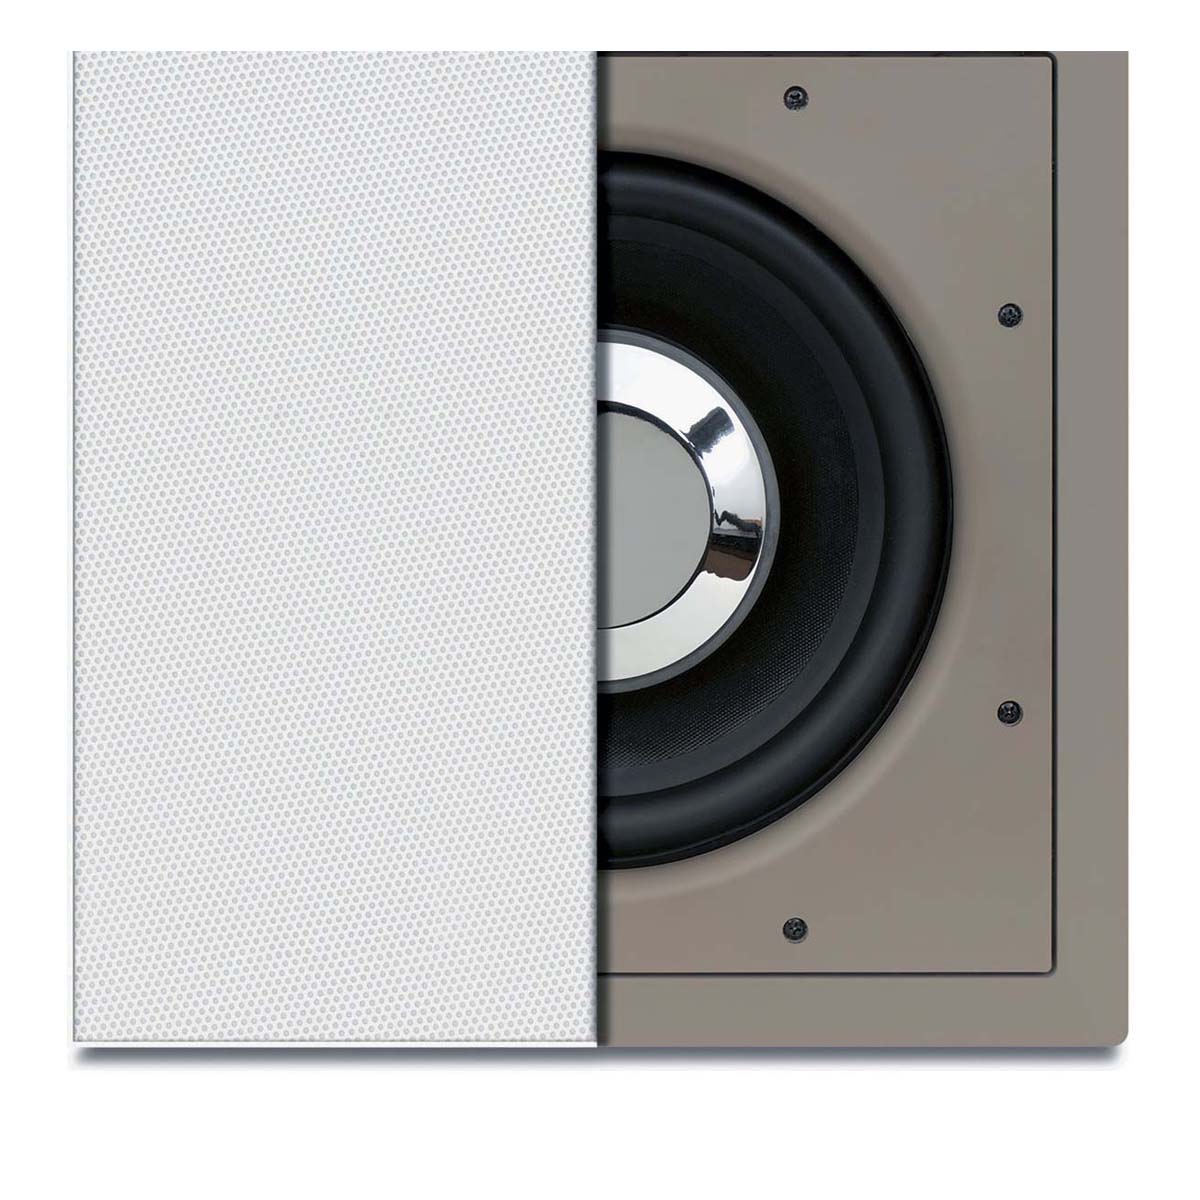 Proficient Audio Protege IWS10s In-Wall Subwoofer